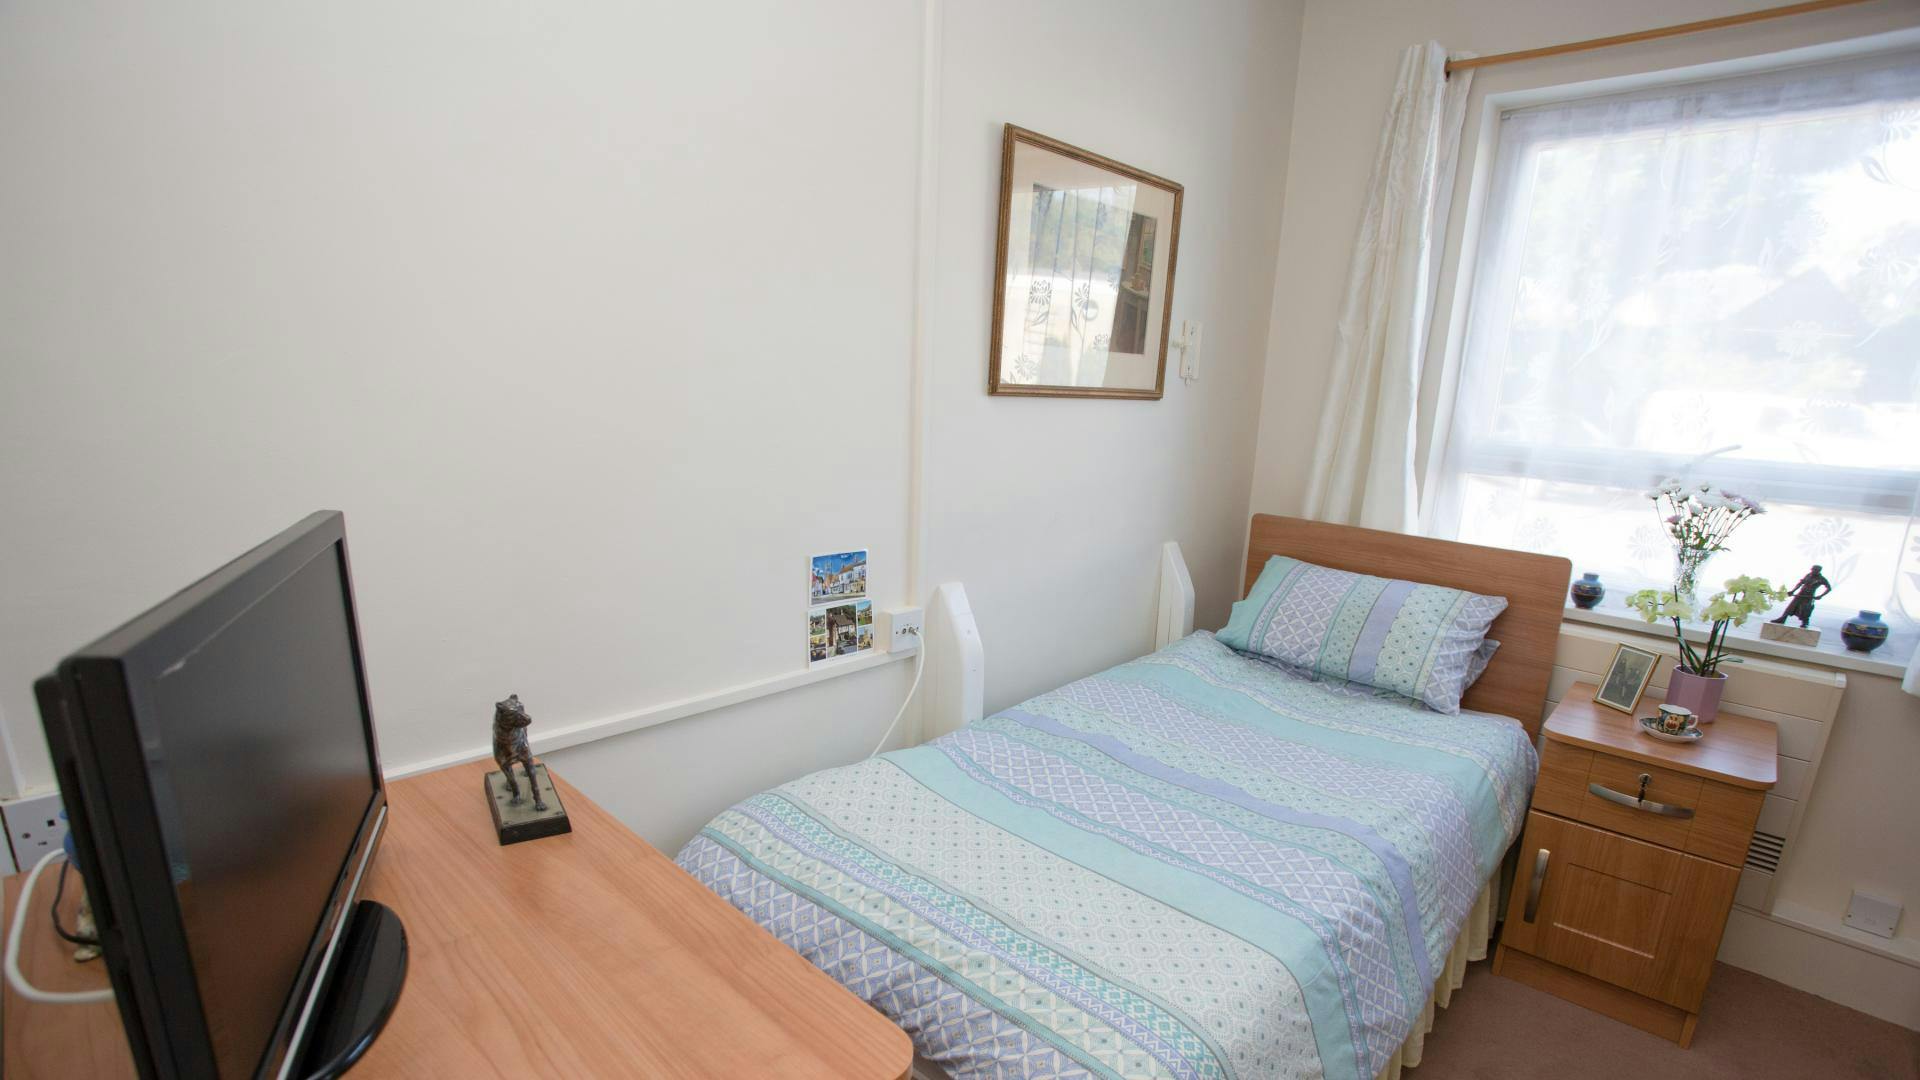 Bedroom at Seymour House Care Home in Chippenham, Wiltshire